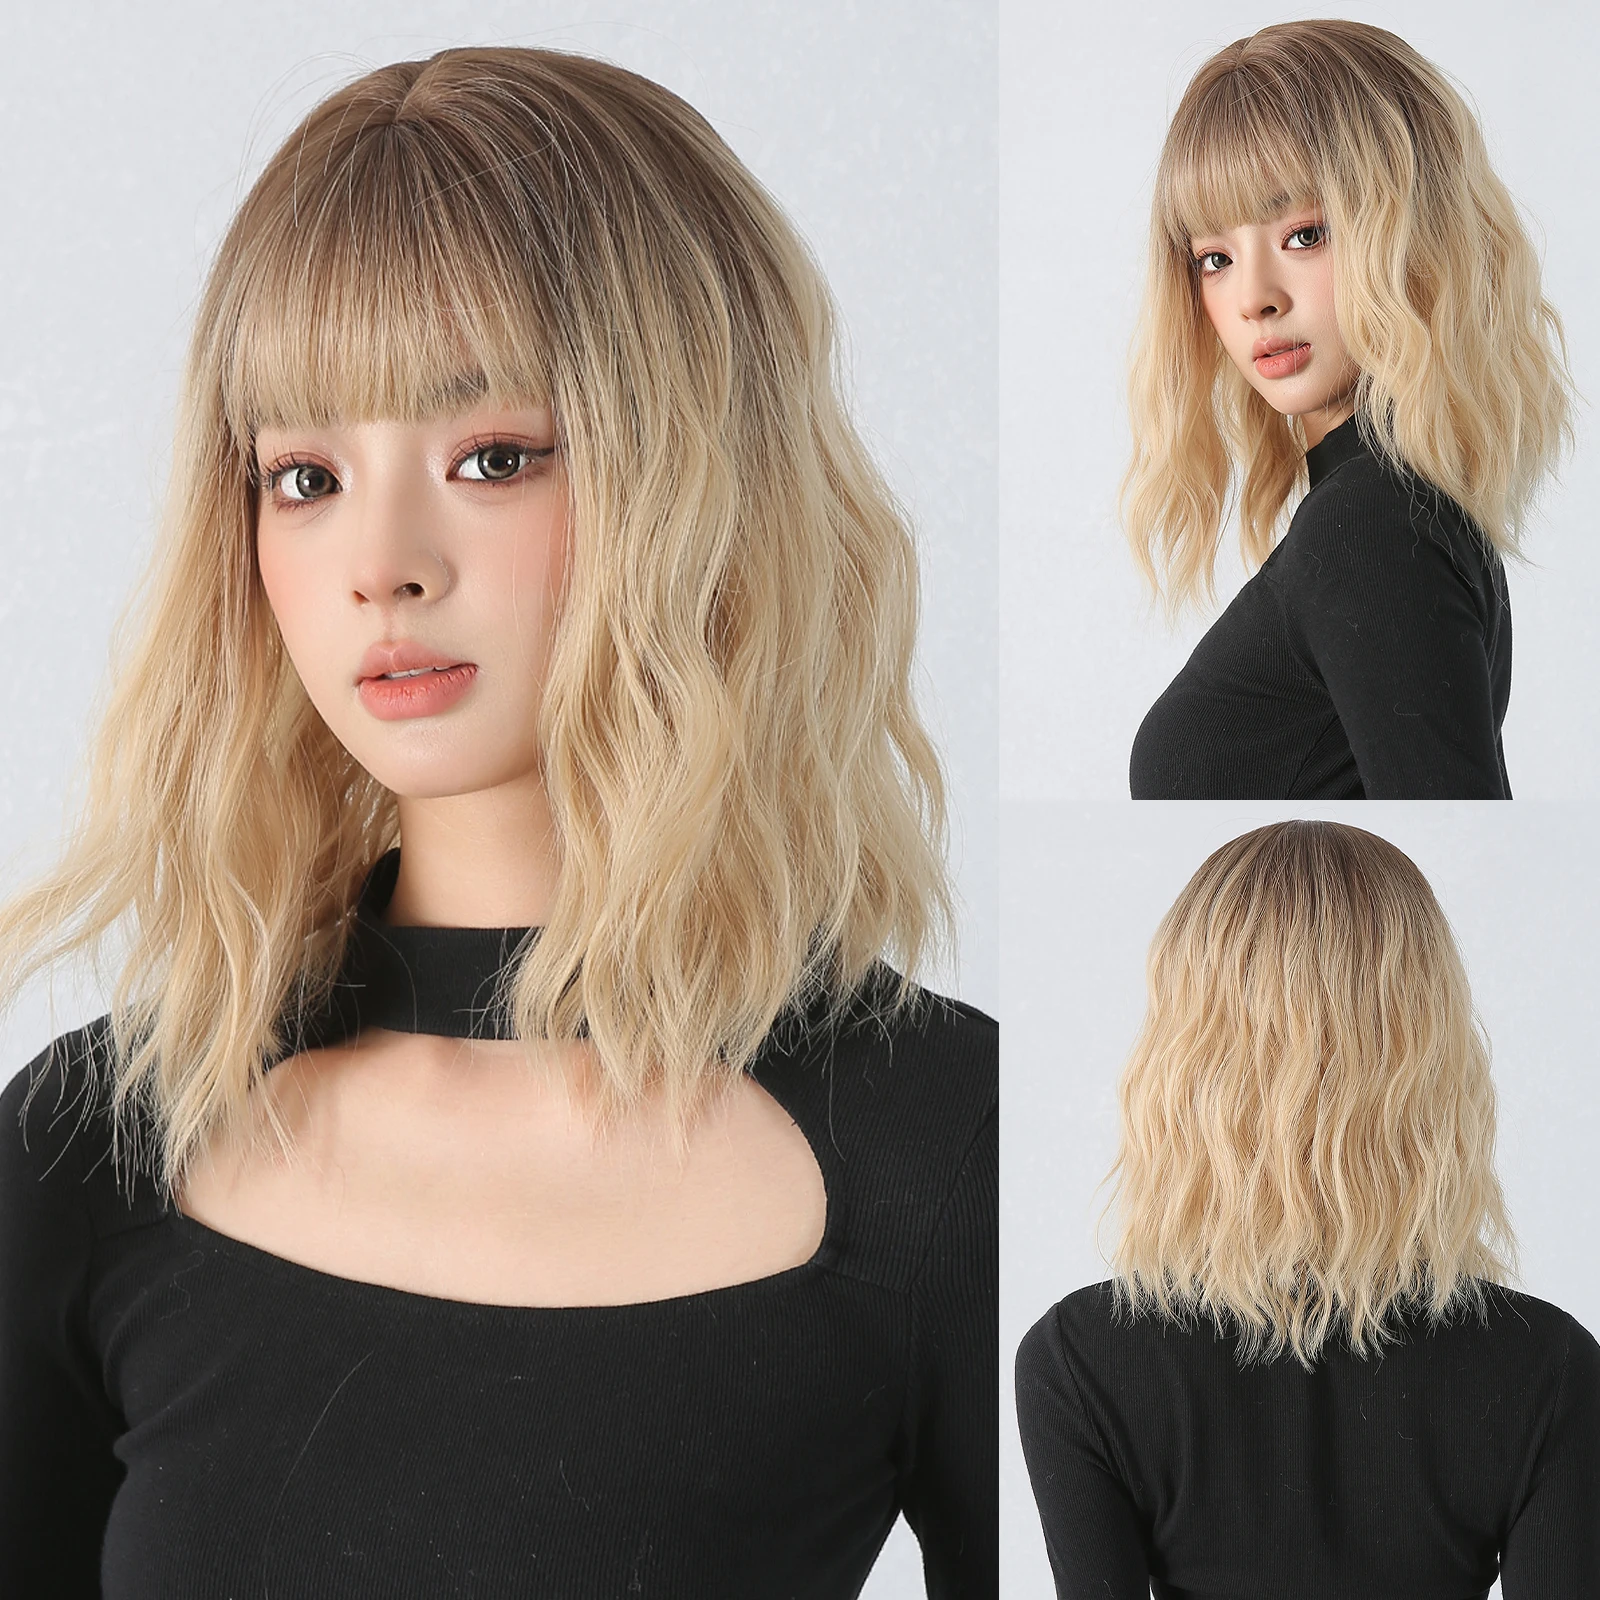 

Short Water Wavy Synthetic Wig Blonde Ombre Brown Women's Bob Wig with Bangs Cosplay Daily Hair for Women Natural Heat Resistant